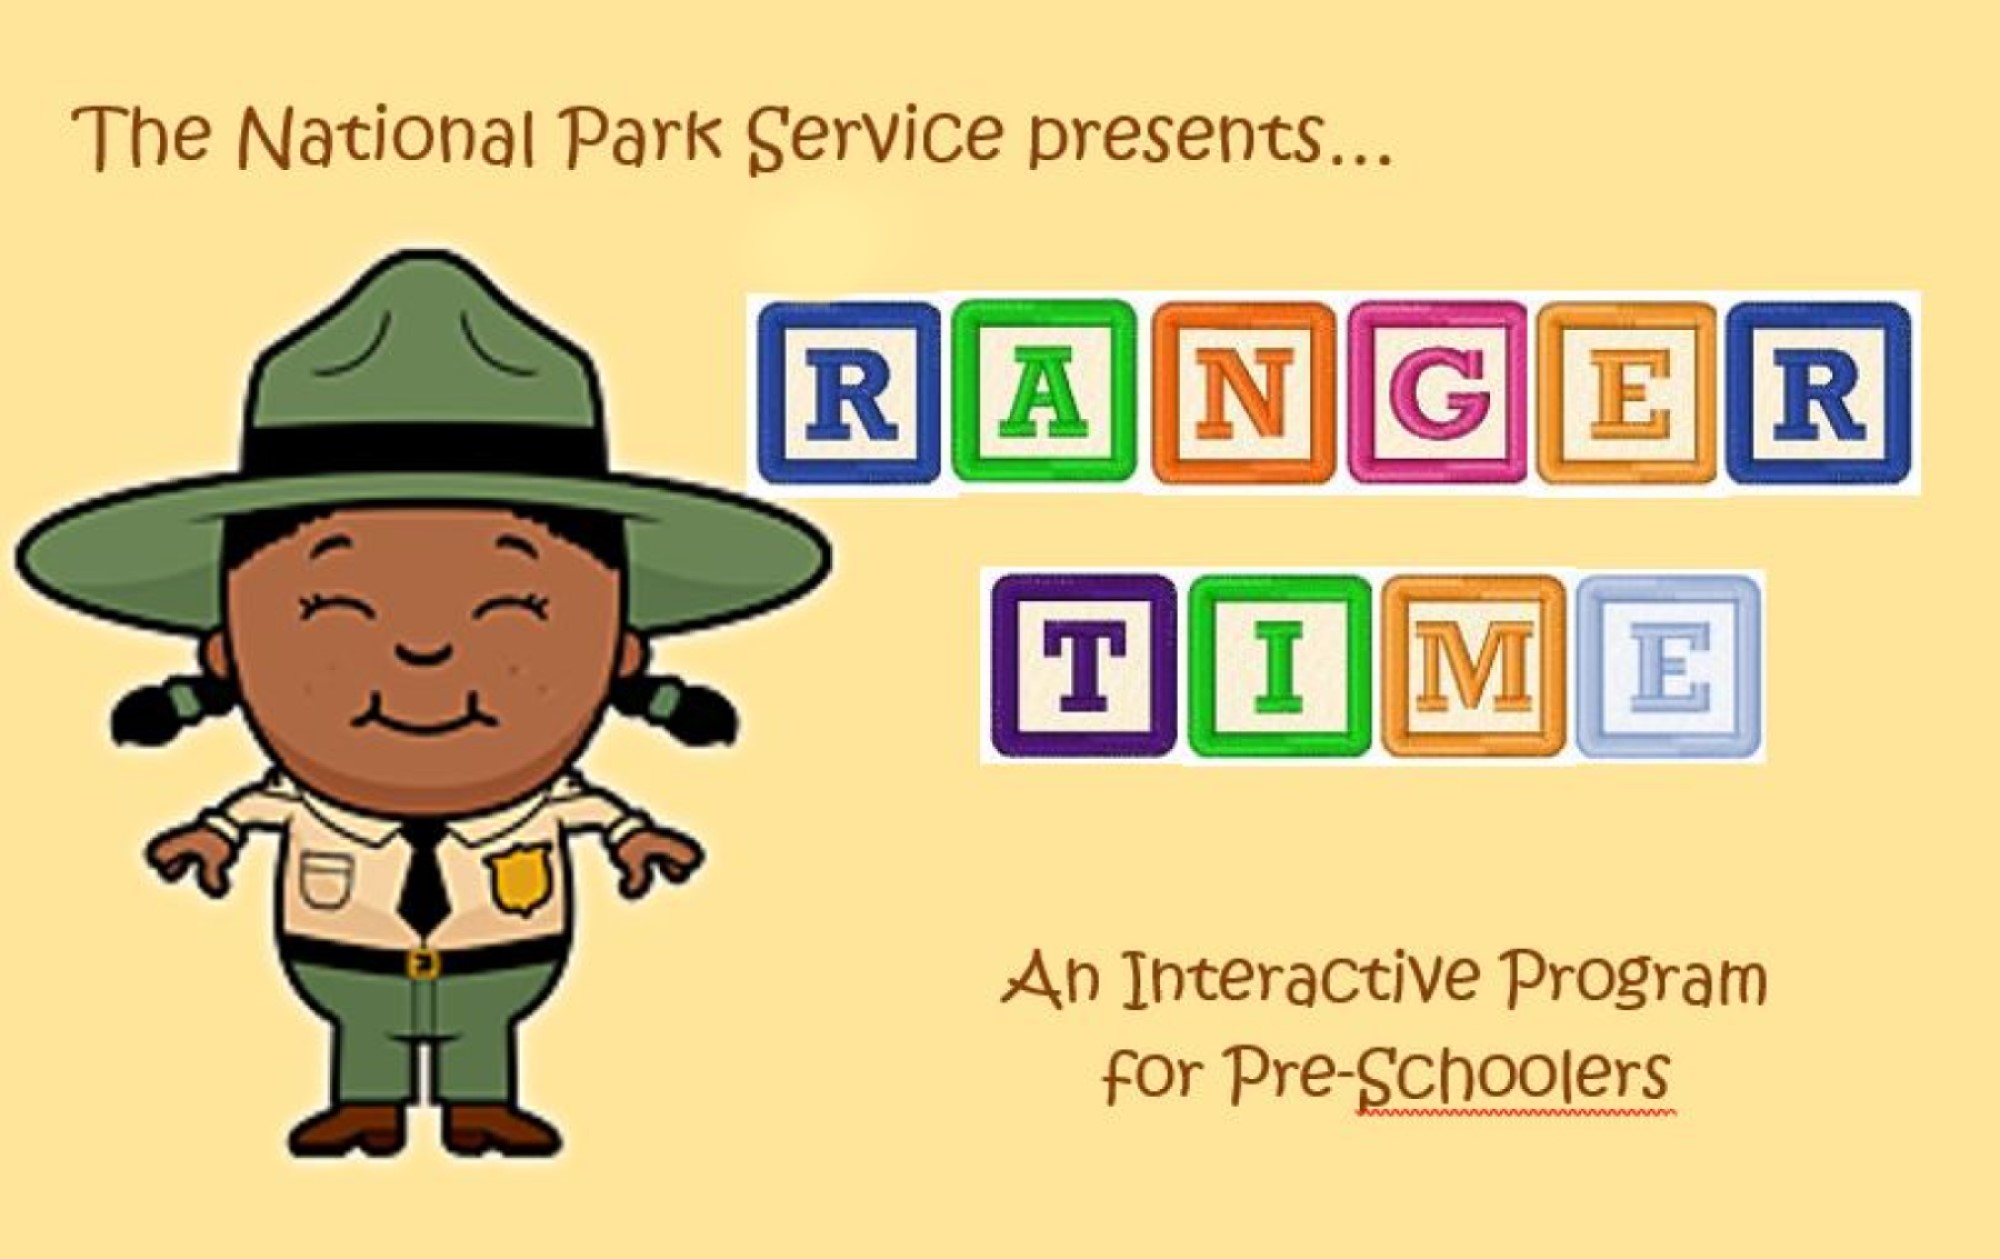 Image of the words "ranger time" spelled out in colorful blocks